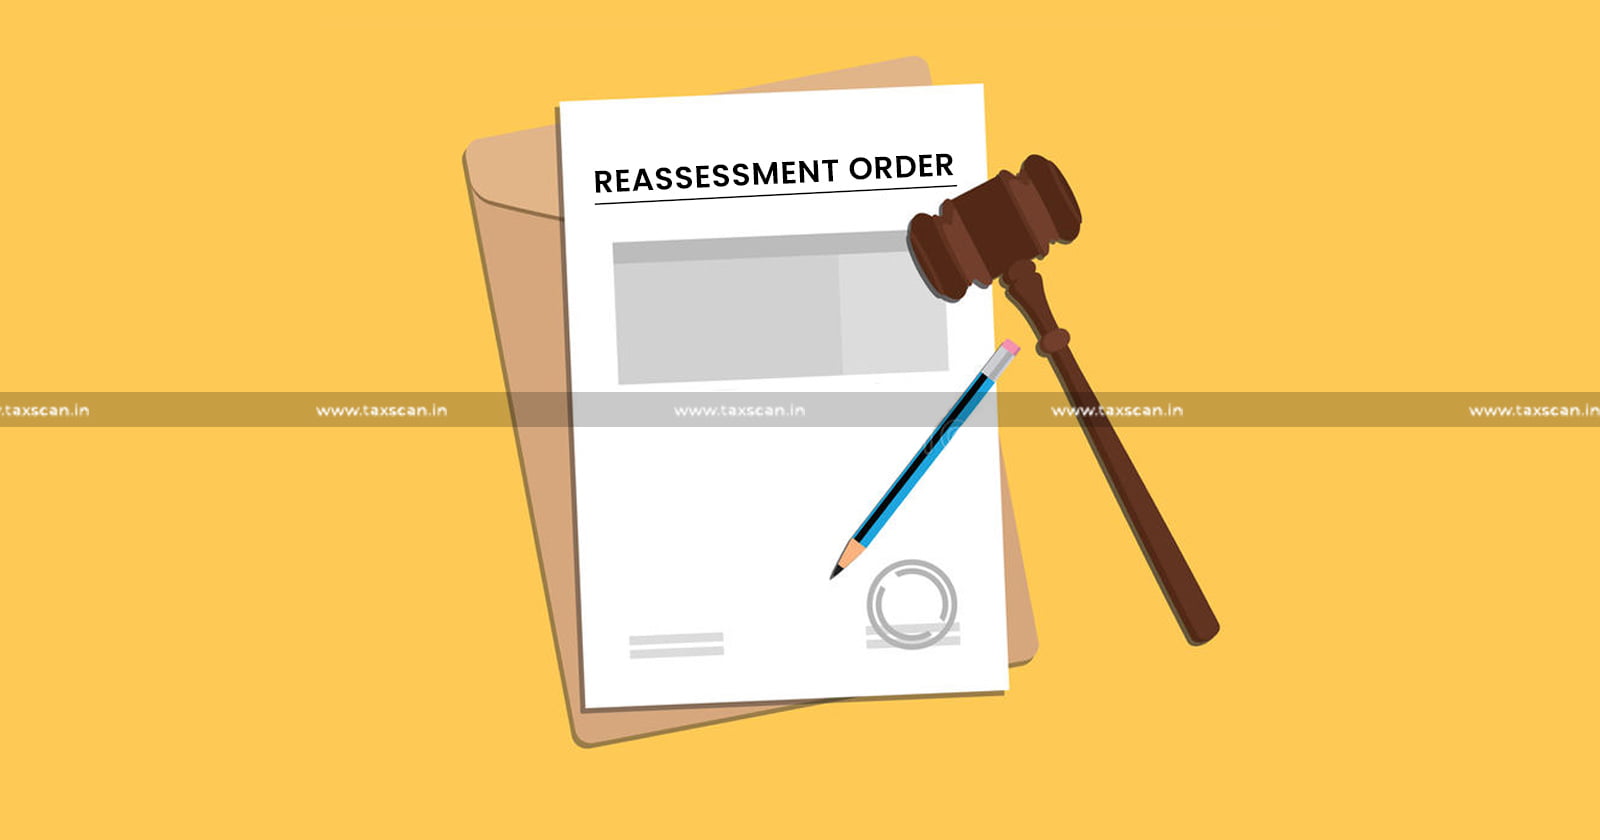 Delhi HC - Reassessment Order - Income Tax Act -Triggered -TAXSCAN